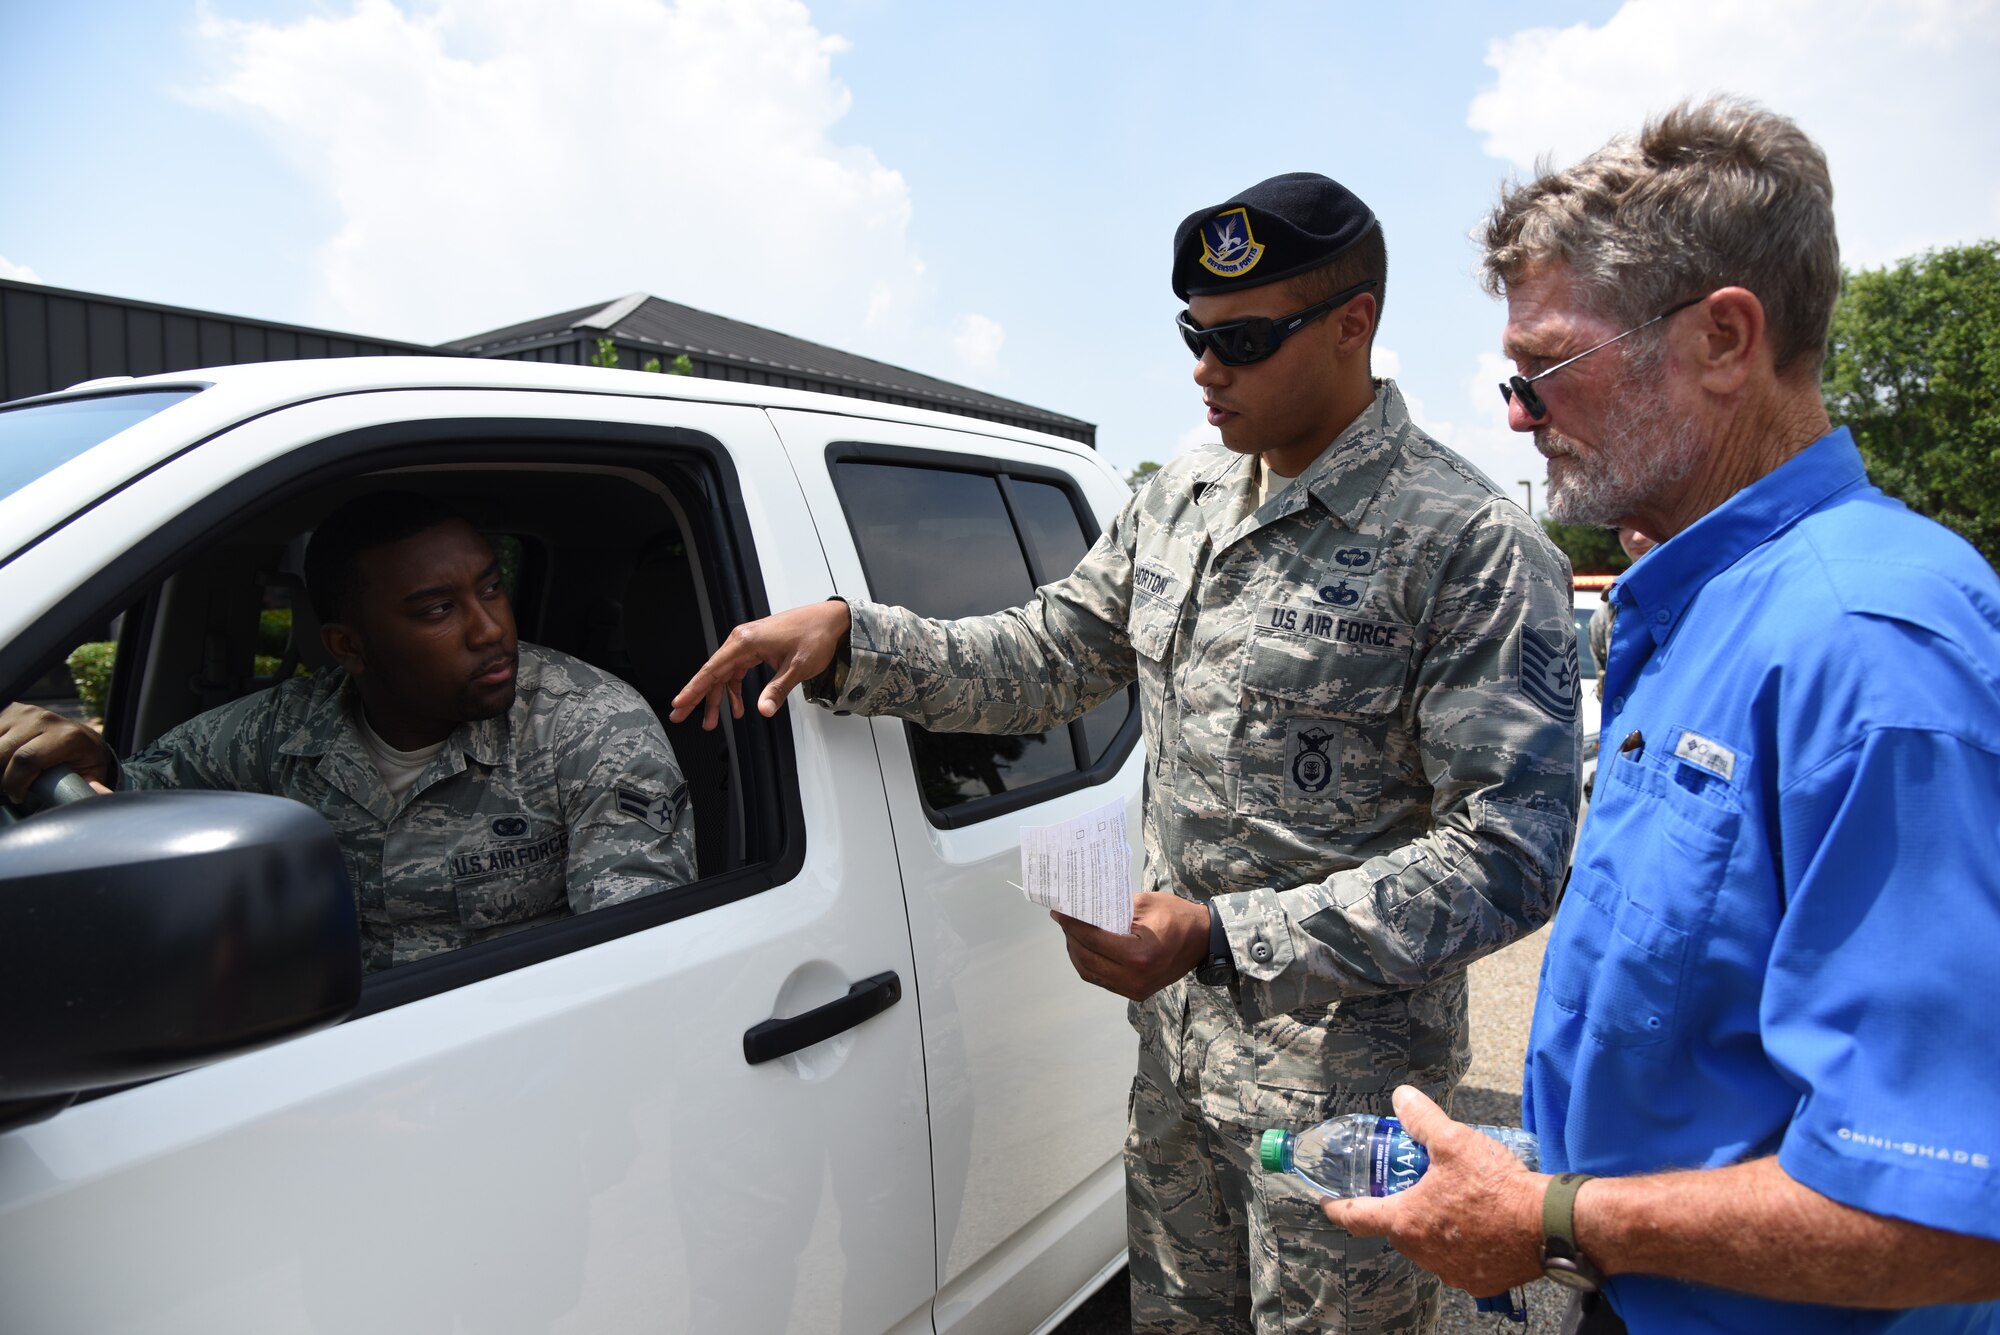 U.S. Air Force Tech. Sgt. Anthony Horton, 81st Security Forces Squadron flight chief, and Airman 1st Class Keshaun Survine, 81st SFS base defense operations center controller, provide a traffic violation demonstration for Brad Bordes, grandfather of Airman Noah Hill, 81st SFS entry controller, during the 81st SFS open house at Keesler Air Force Base, Mississippi, May 17, 2018. The open house allowed individuals to walk through a day in the life of a defender. The event was held during National Police Week, which recognizes the service of law enforcement men and women who put their lives at risk every day. (U.S. Air Force photo by Kemberly Groue)